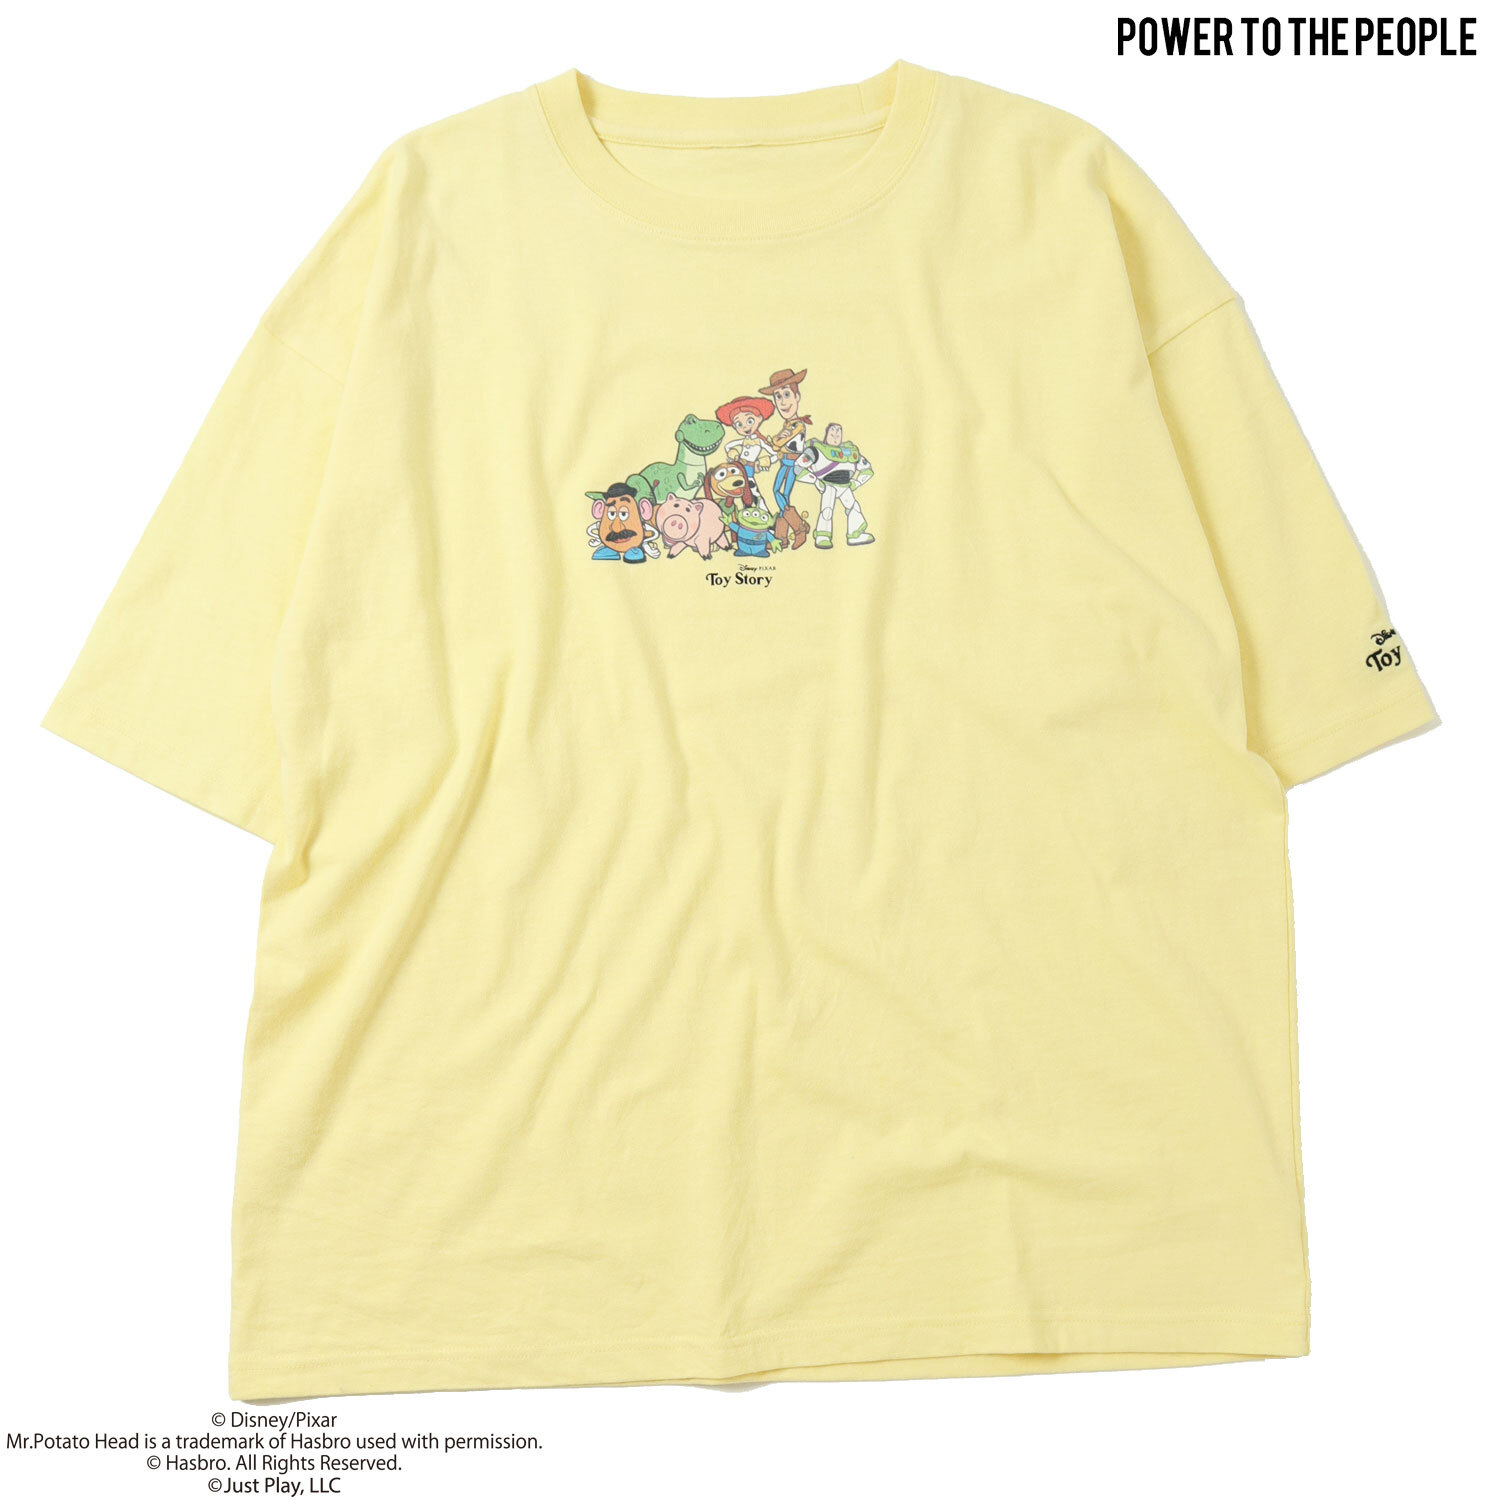 【TOY STORY】フロントキャラプリントオーバーTee　NO1515036